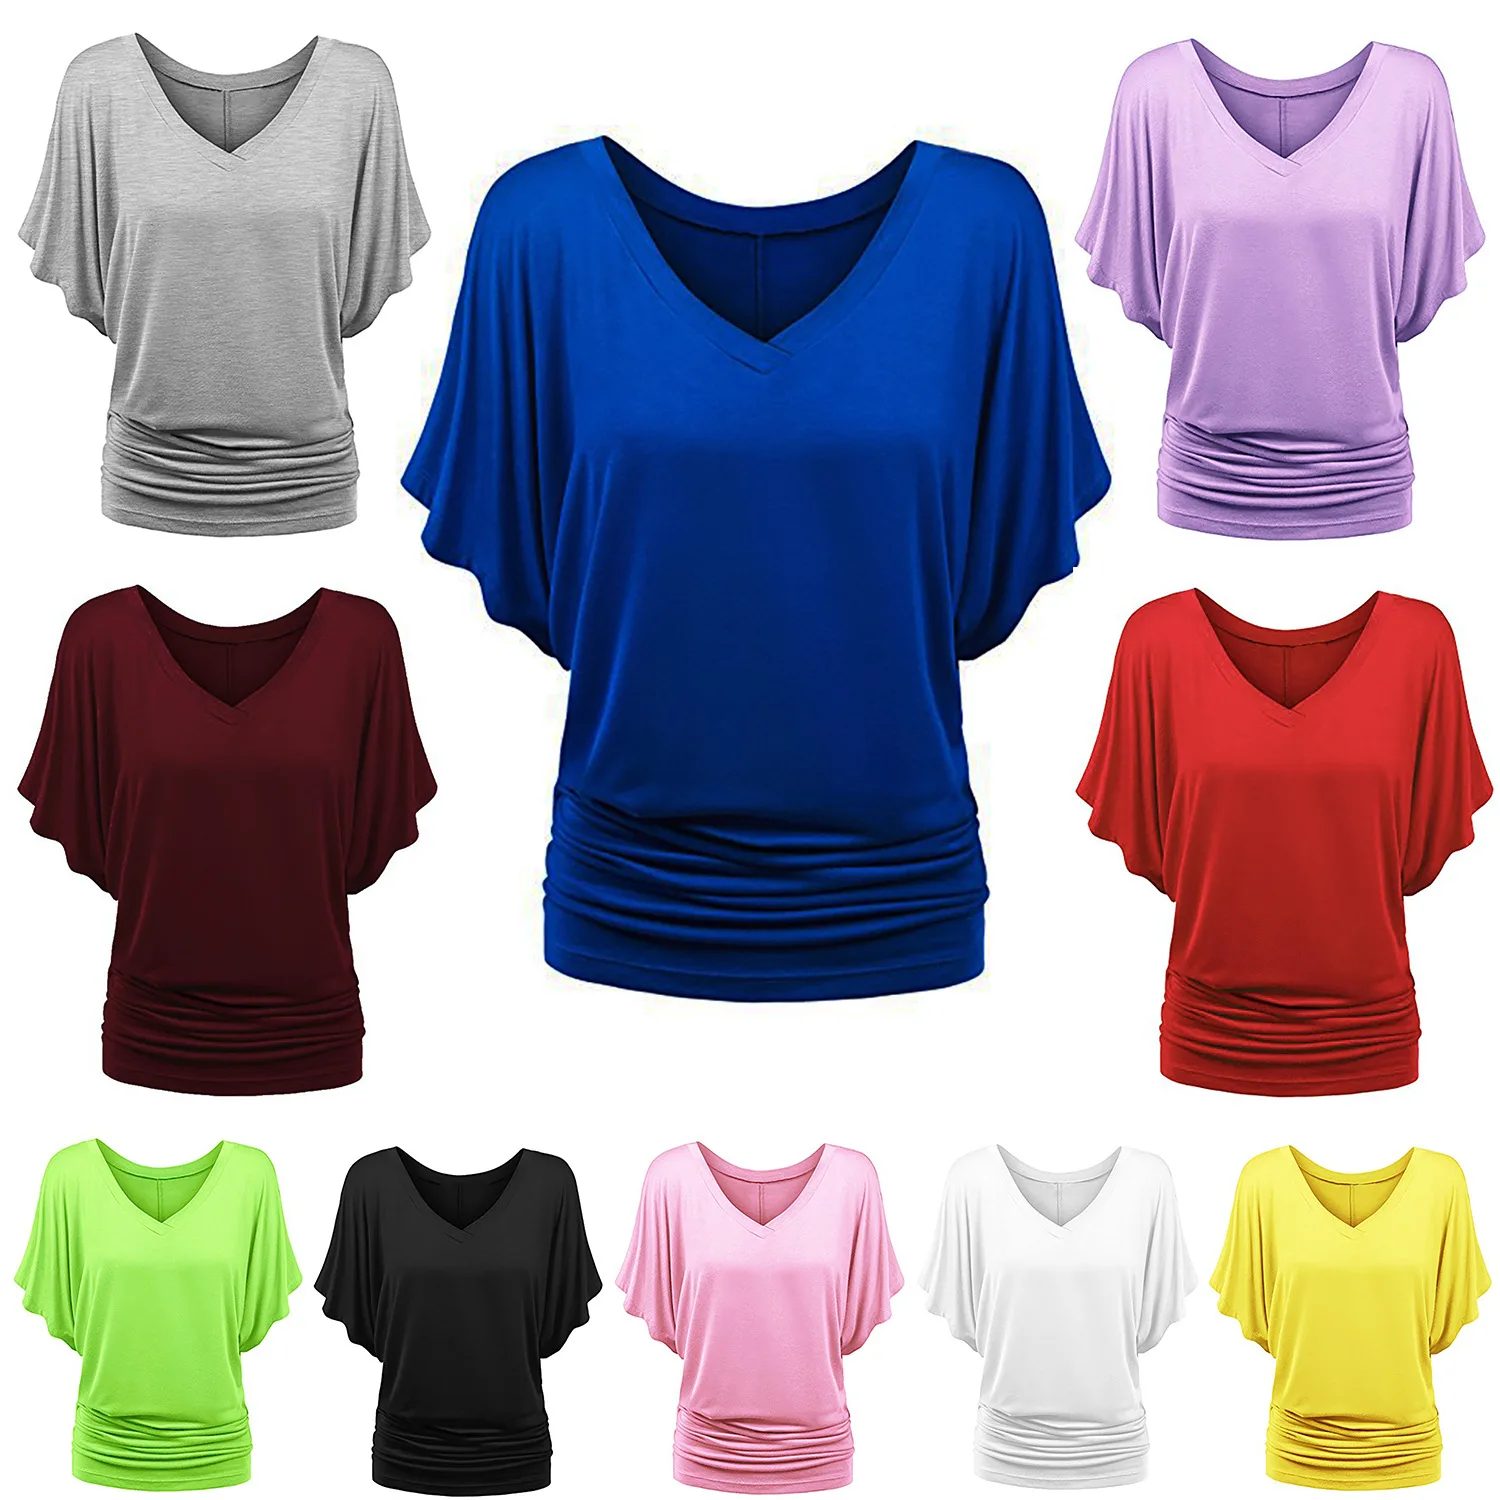 

Oversized 7XL Summer Women's V-neck Bat Short Sleeve T-shirt Loose Solid TShirts Female Fat tops Tees Large Size Tops